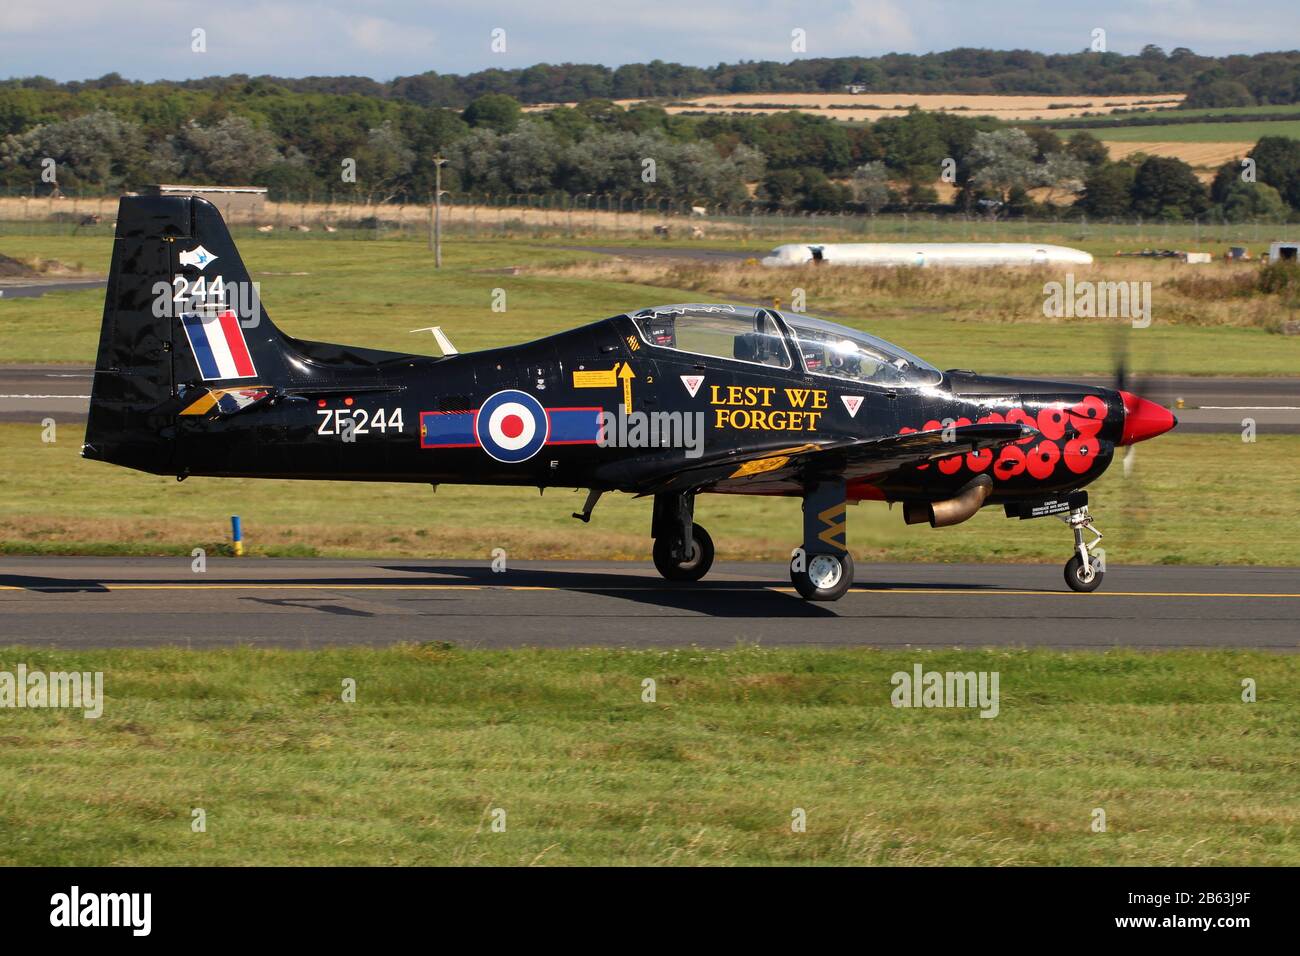 ZF244, a Shorts Tucano T1 operated by the Royal Air Force's Tucano Display Team, at Prestwick Airport during the Scottish Airshow in 2014. Stock Photo